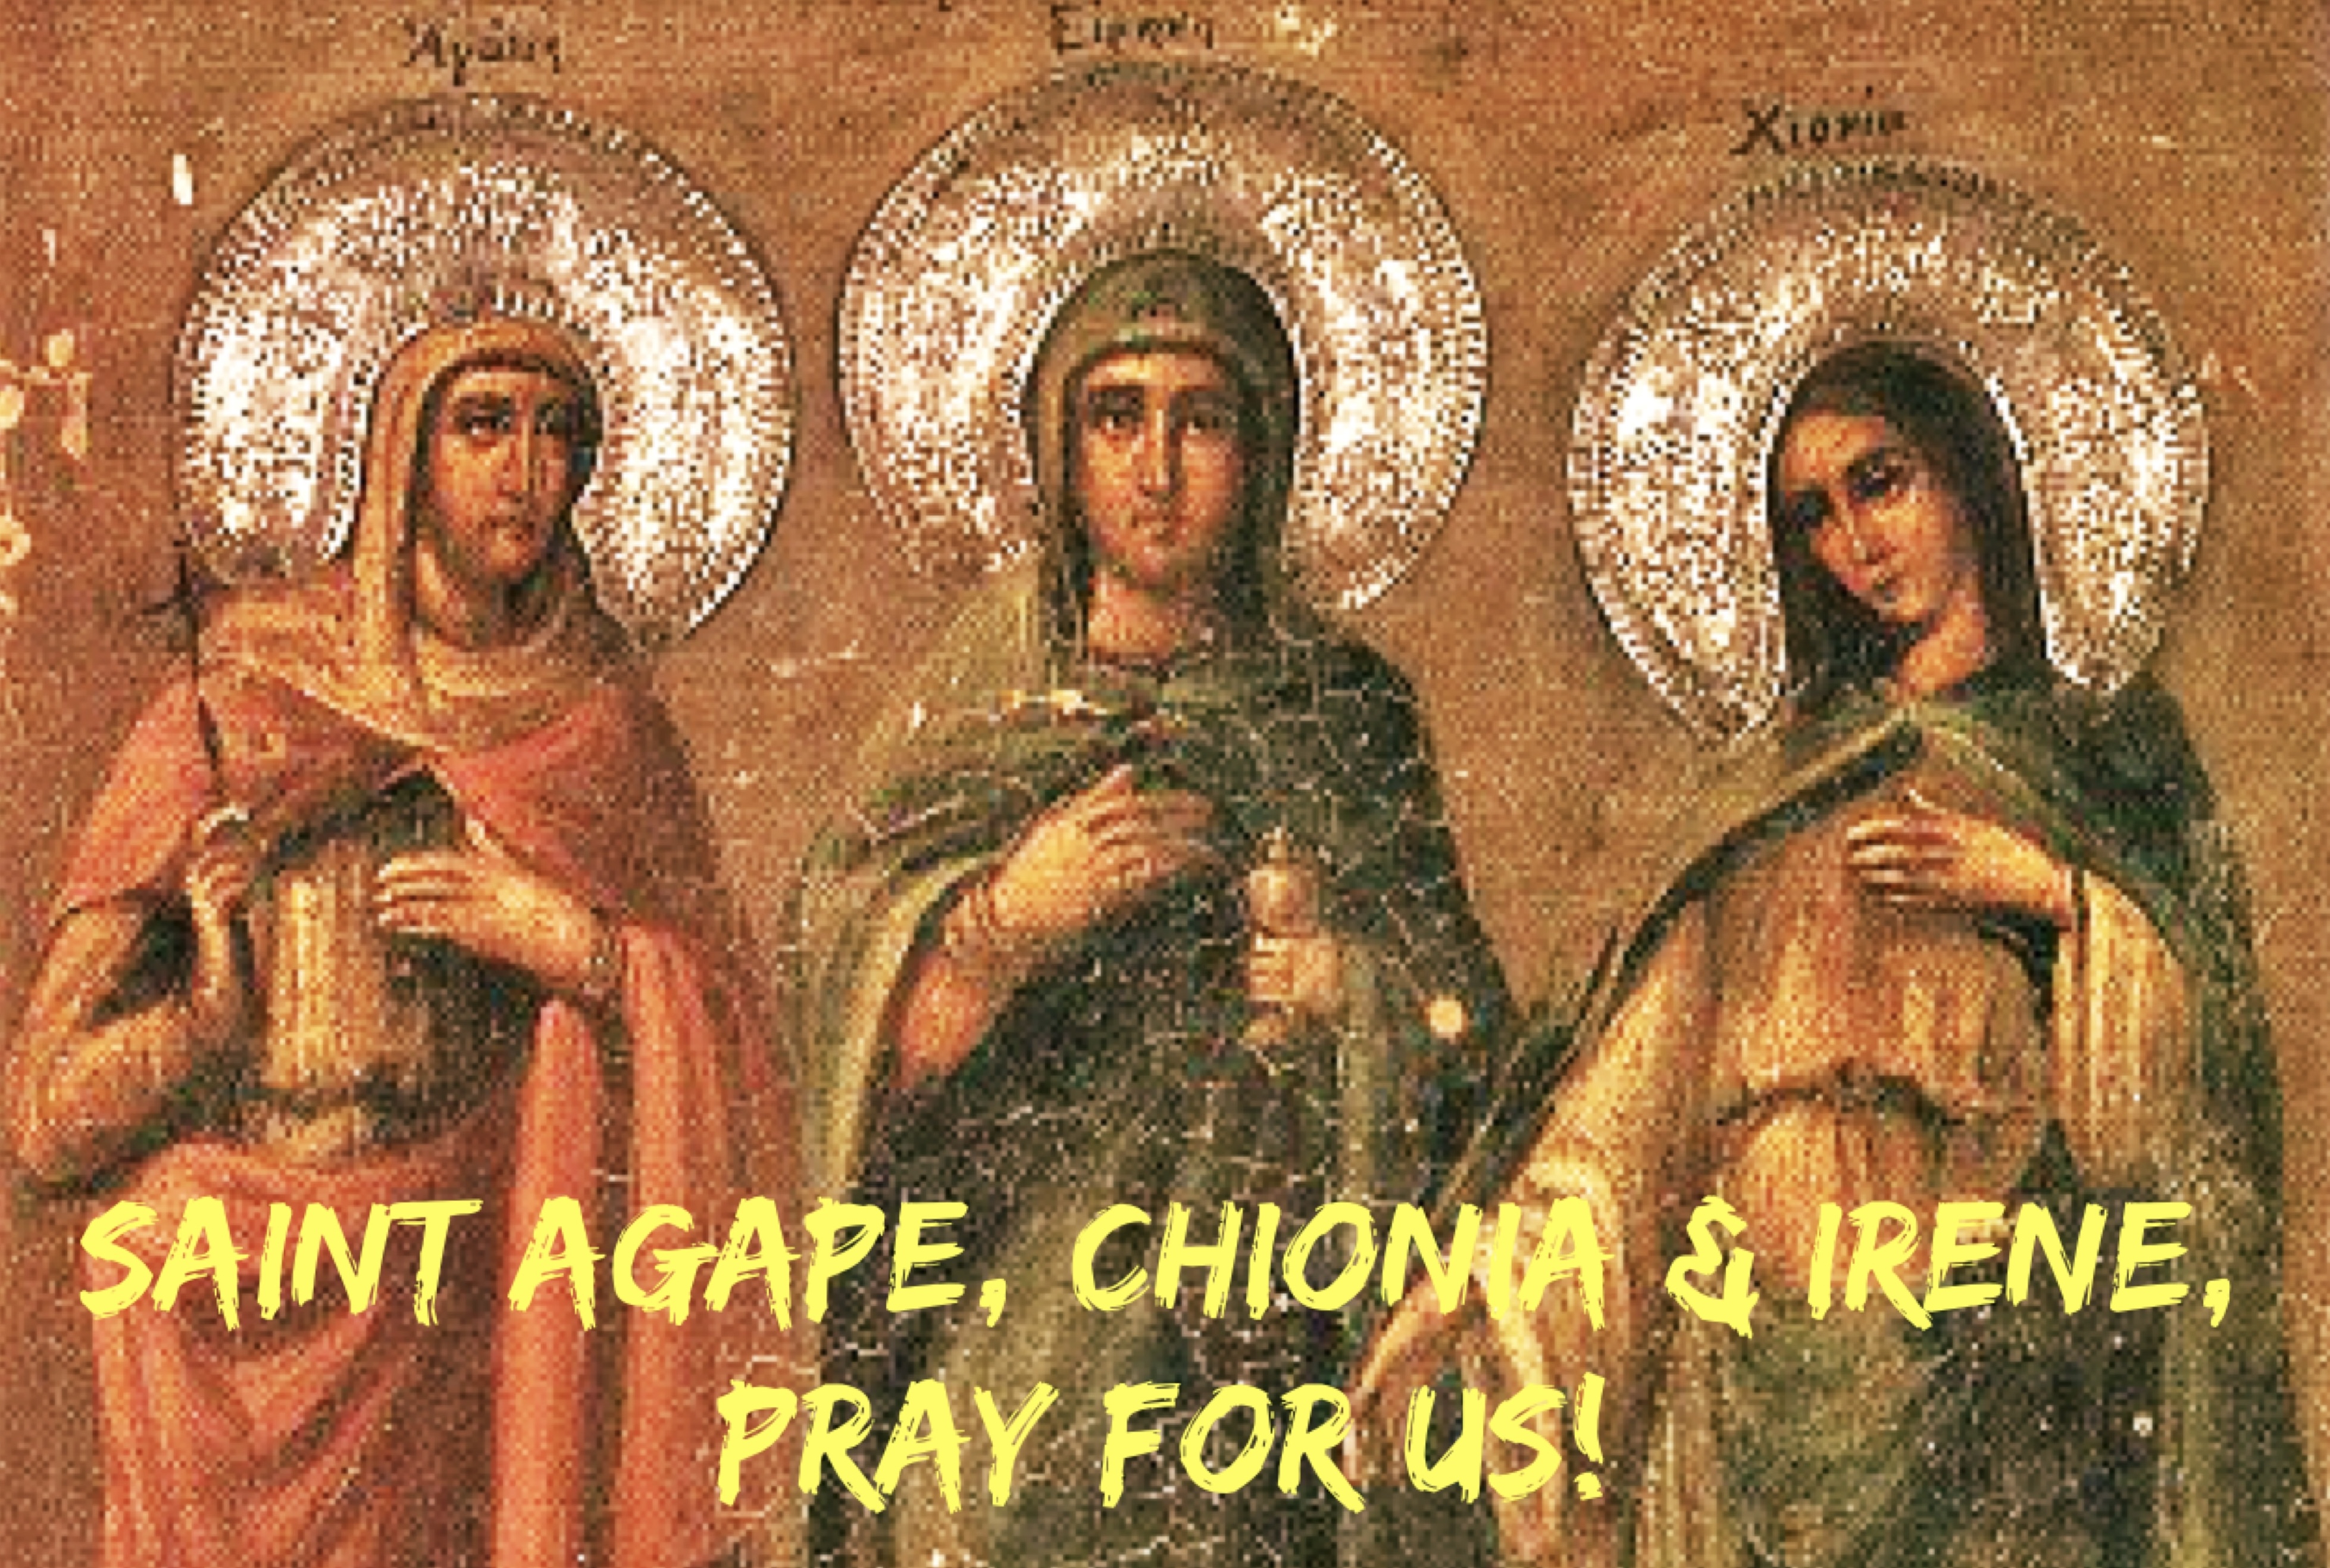 3rd April - Saints Agape, Chionia and Irene